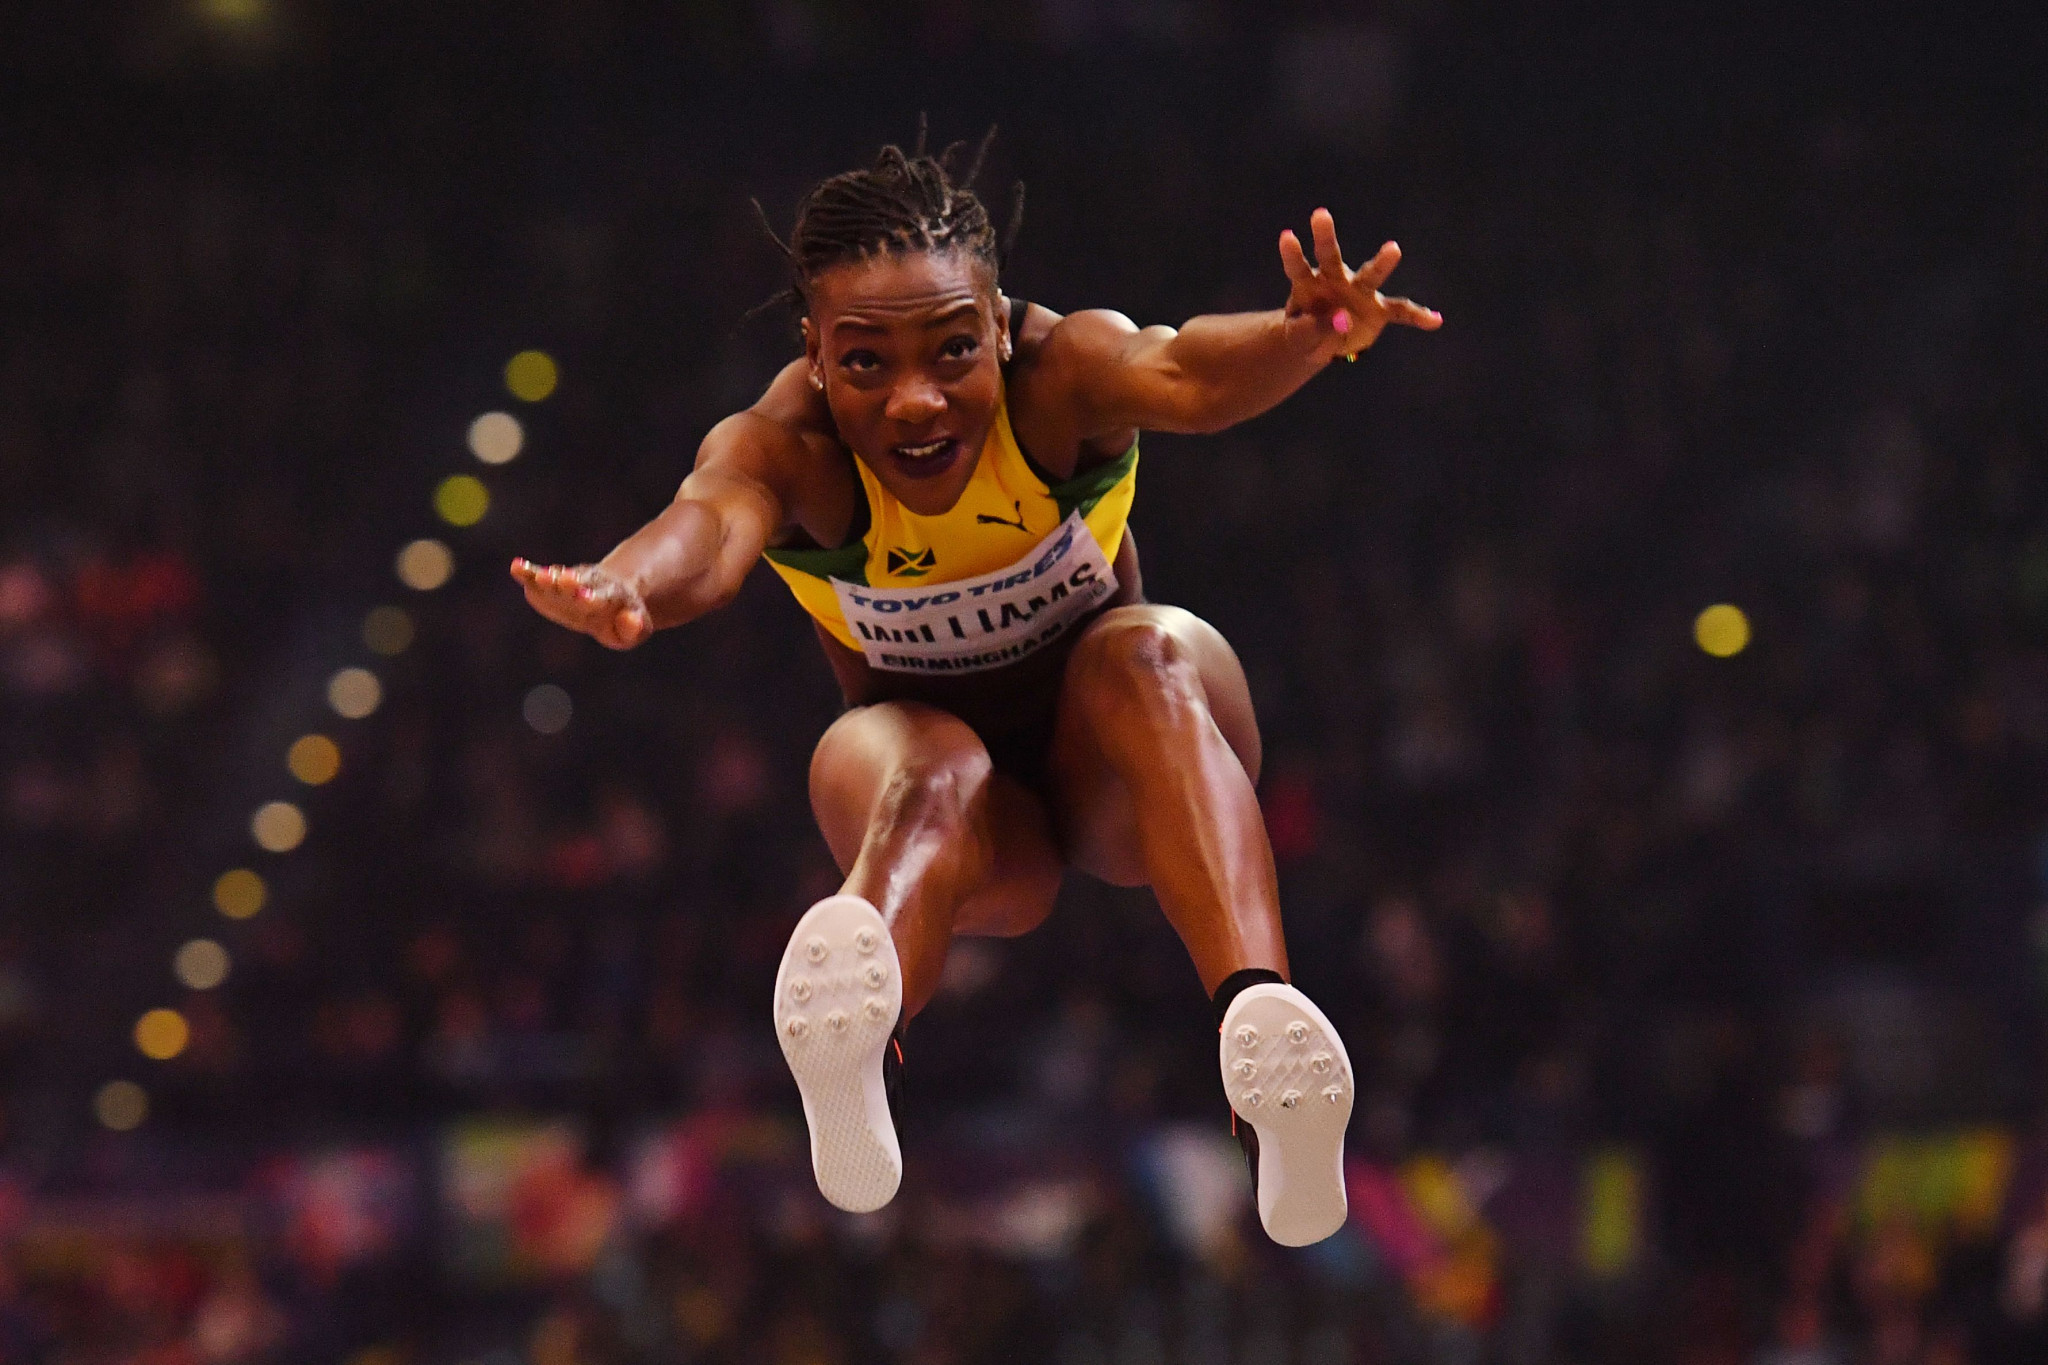 Kimberley Williams, winner of the silver medal in the triple jump at the IAAF World Indoor Championships in Birmingham, is among Jamaica's team for Gold Coast 2018 ©Getty Images